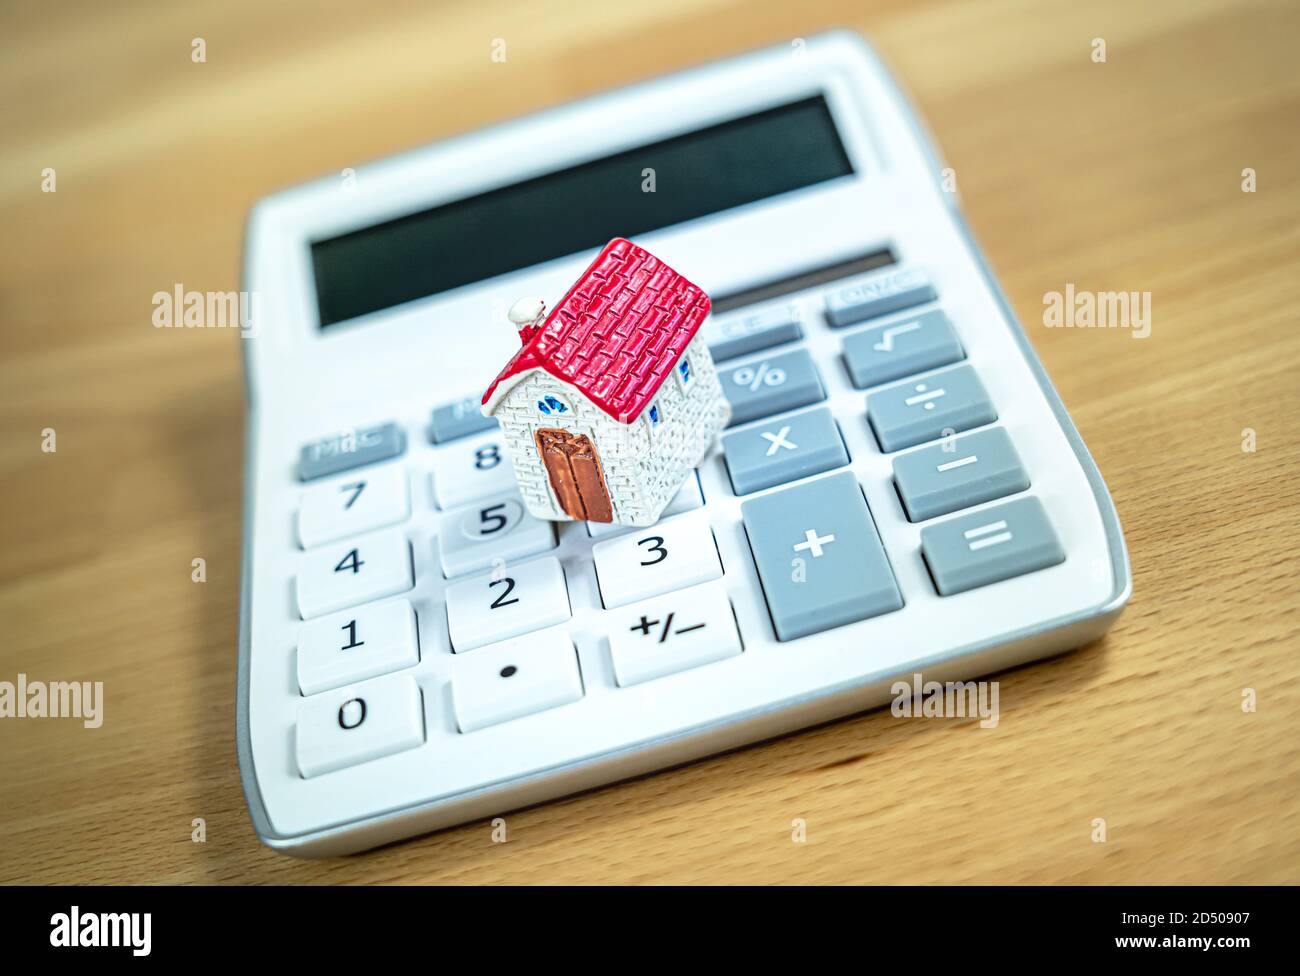 Real Estate investment - Property calculation Stock Photo